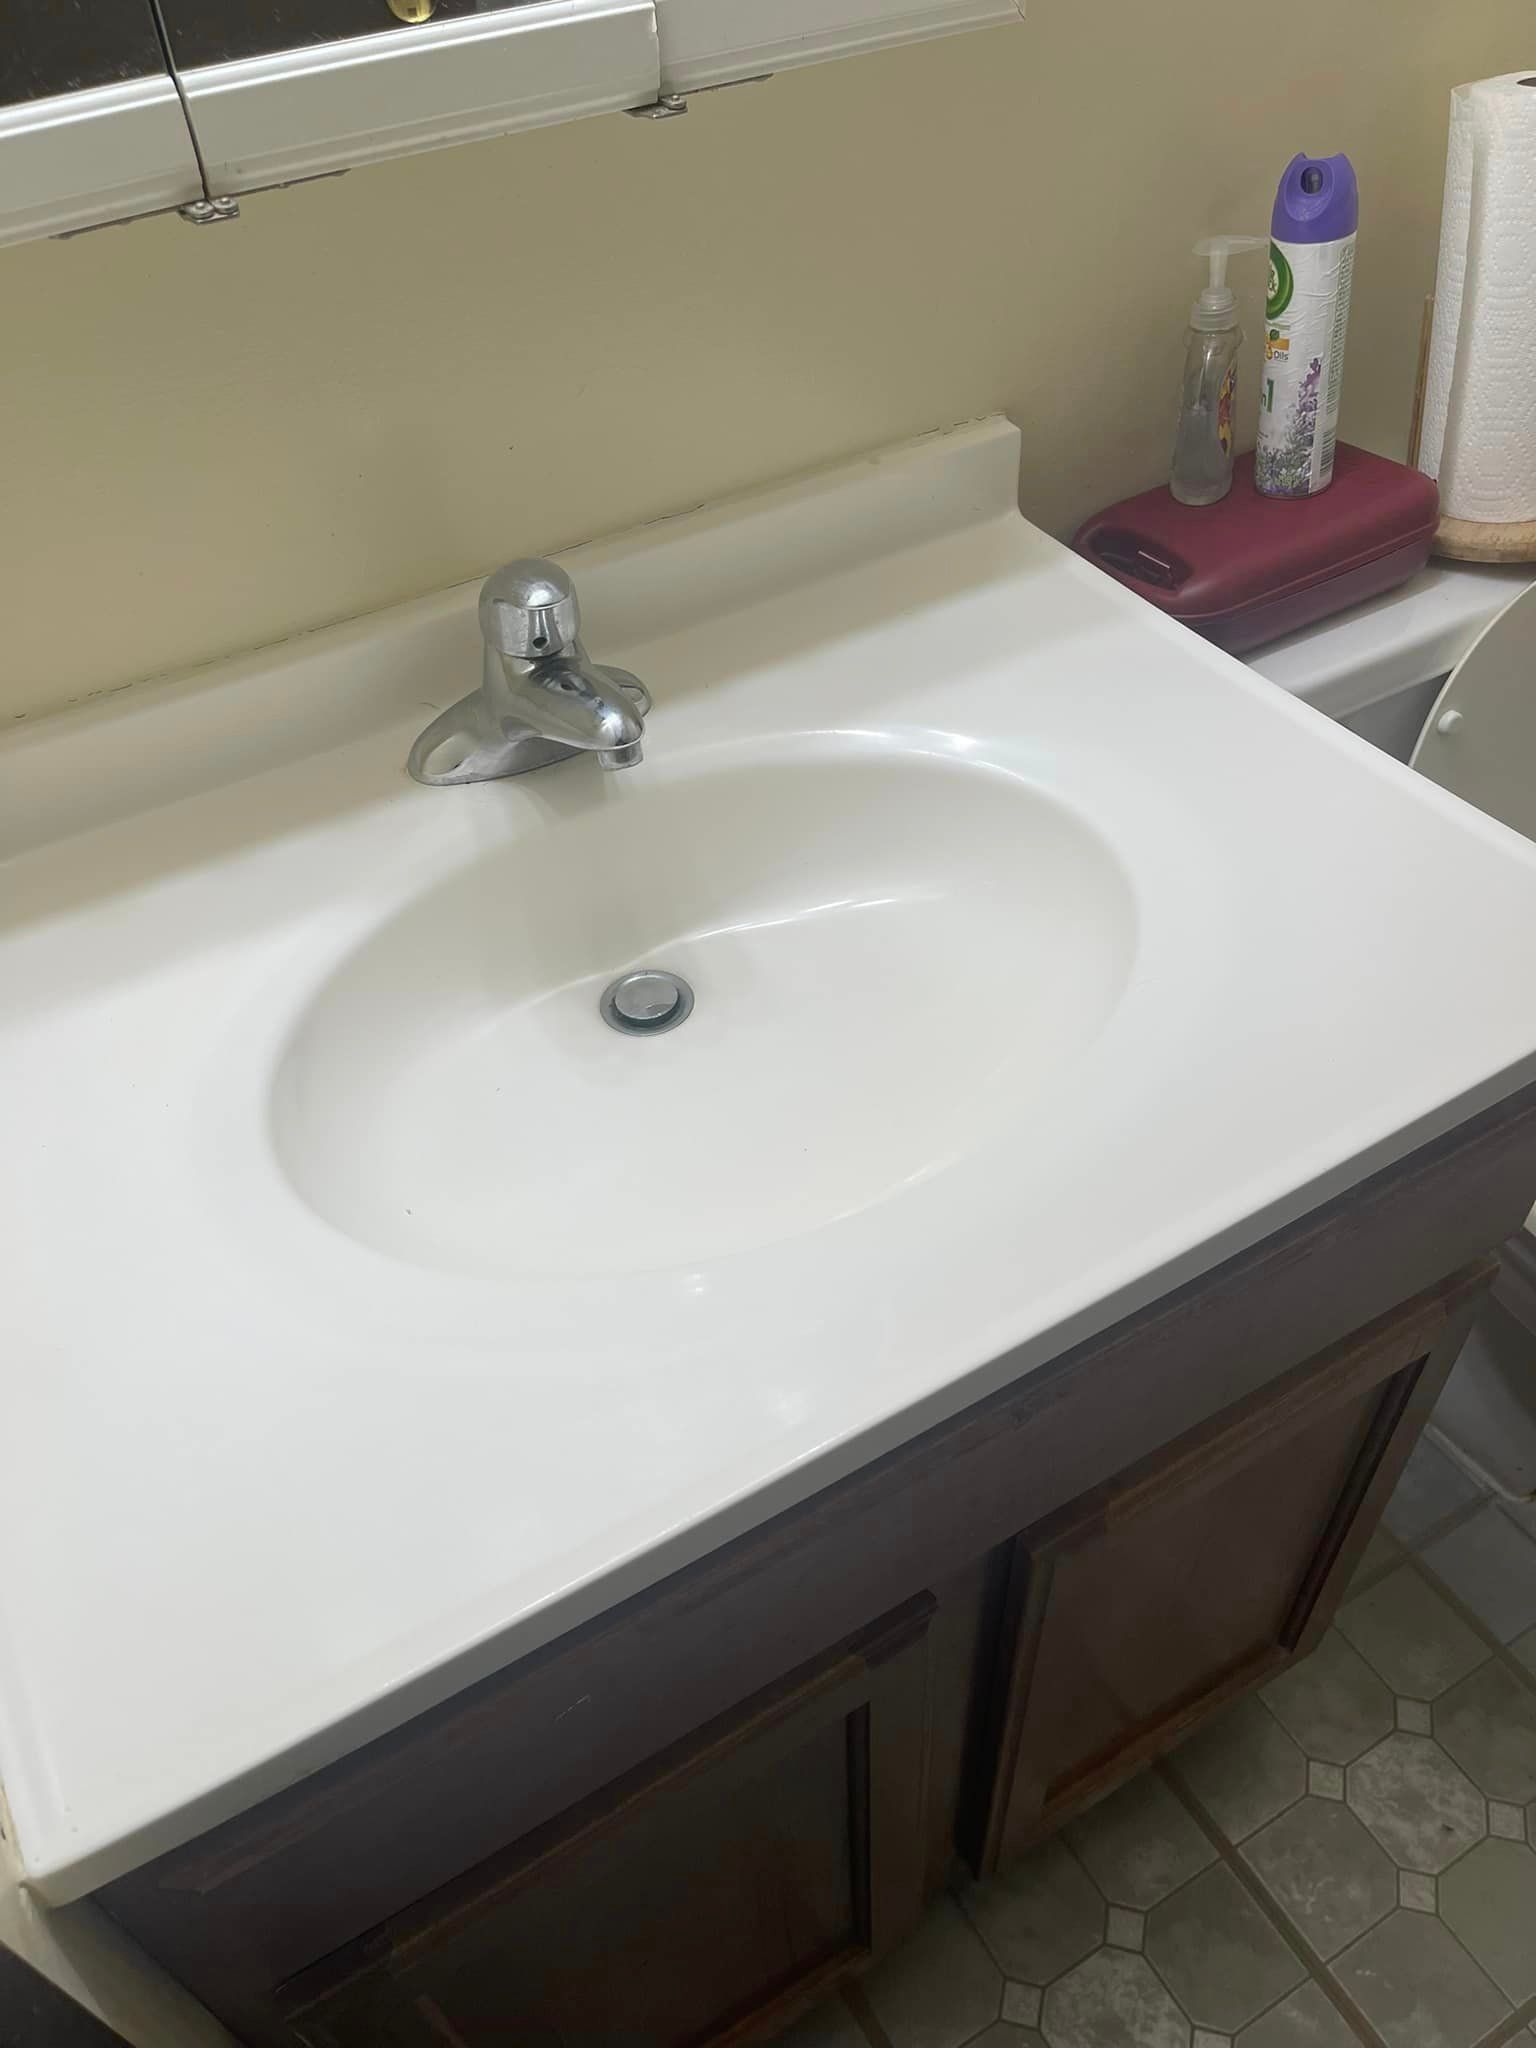 After is a clean and sparkling bathroom sink